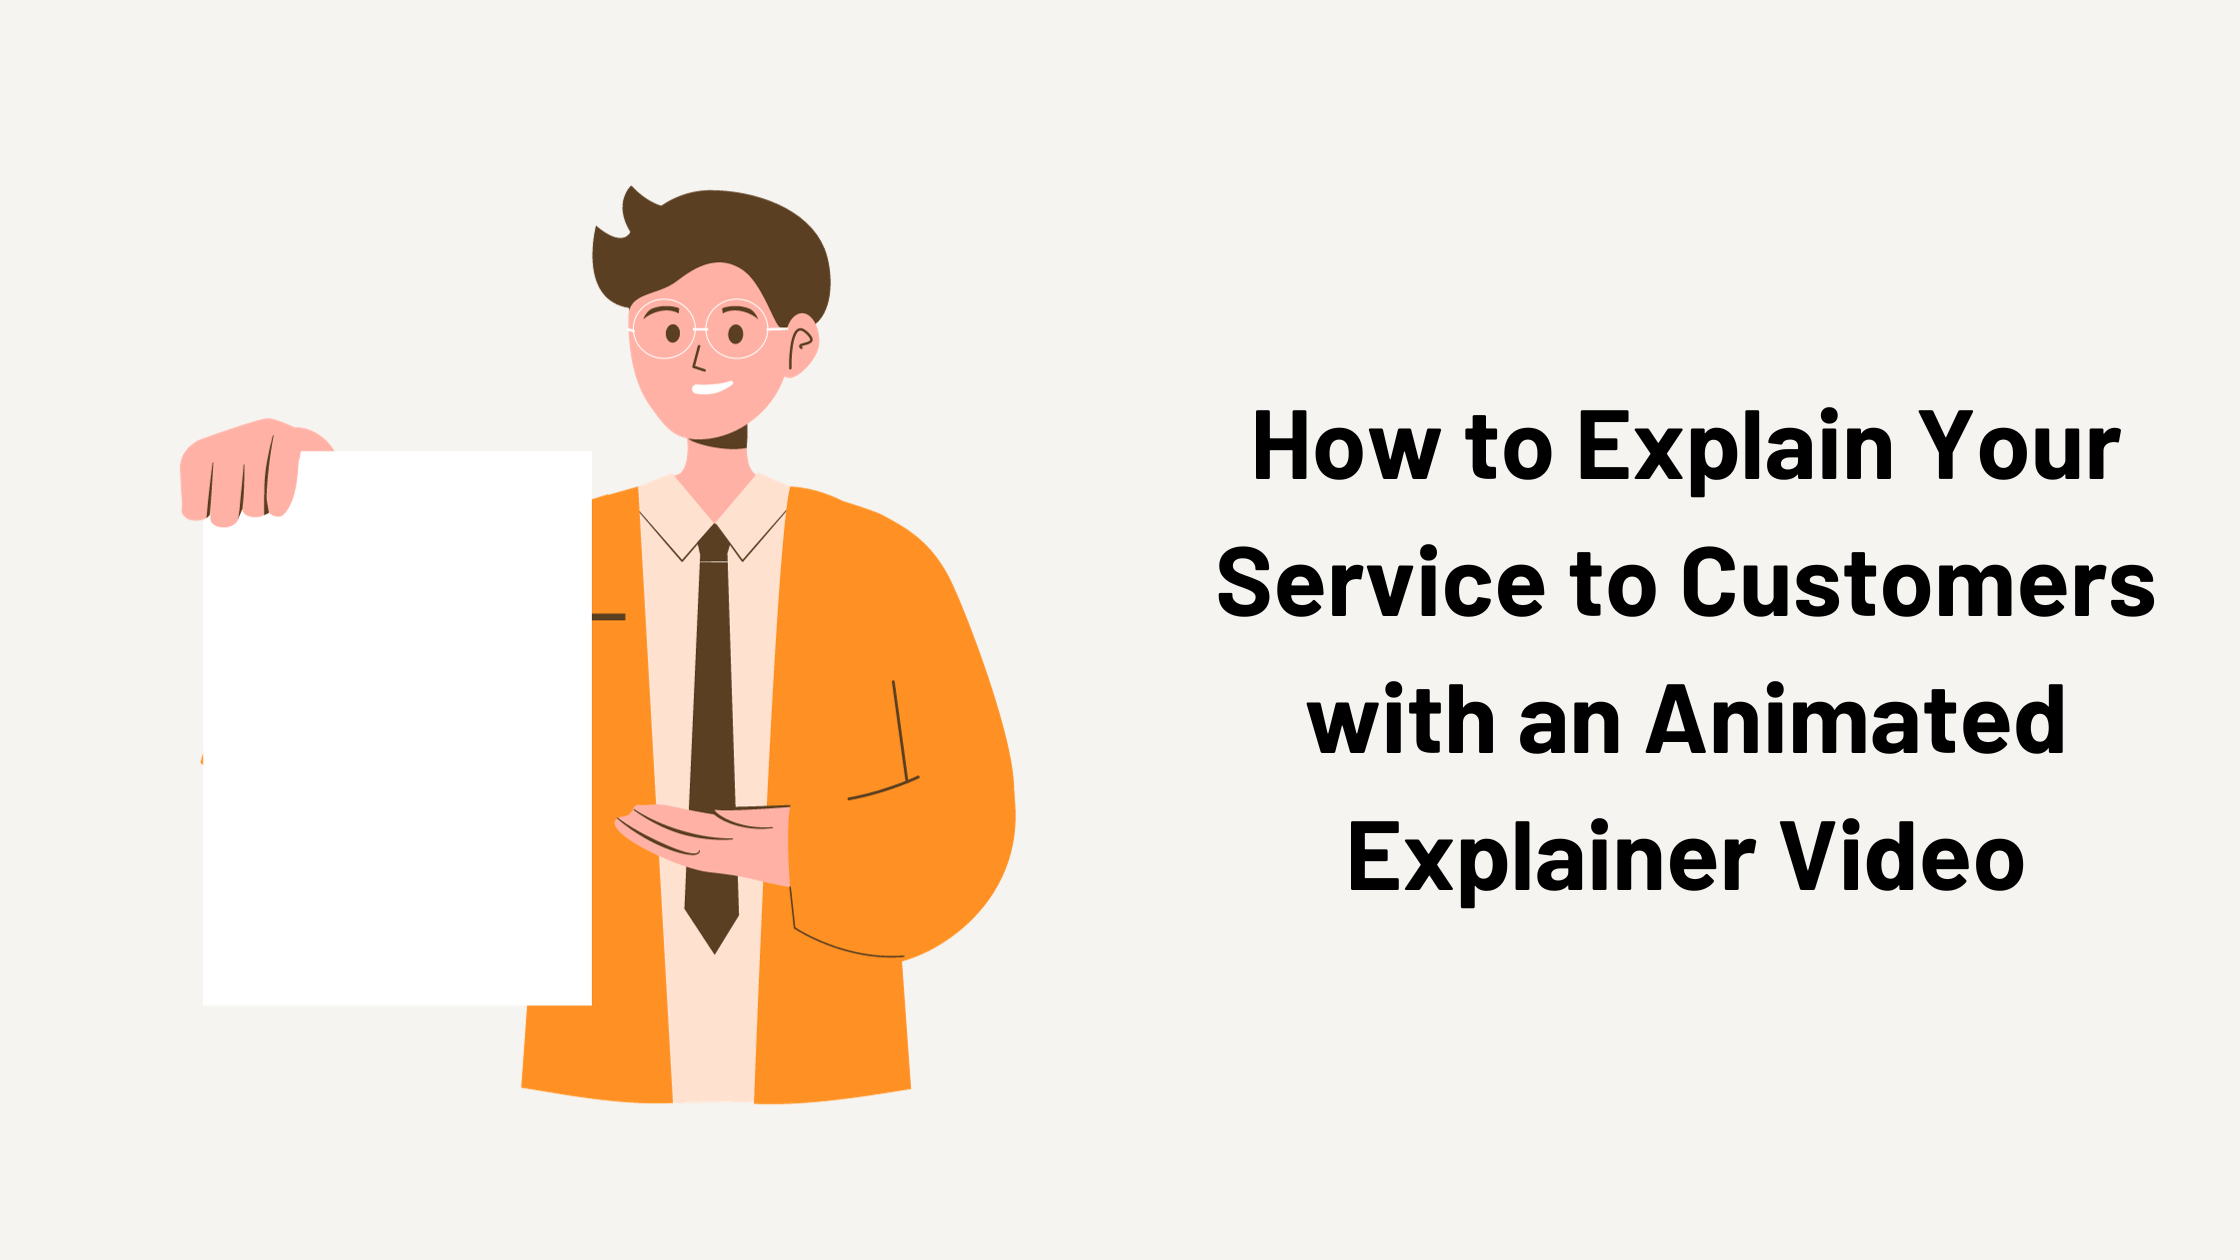 How to Explain Your Service to Customers with an Animated Explainer Video